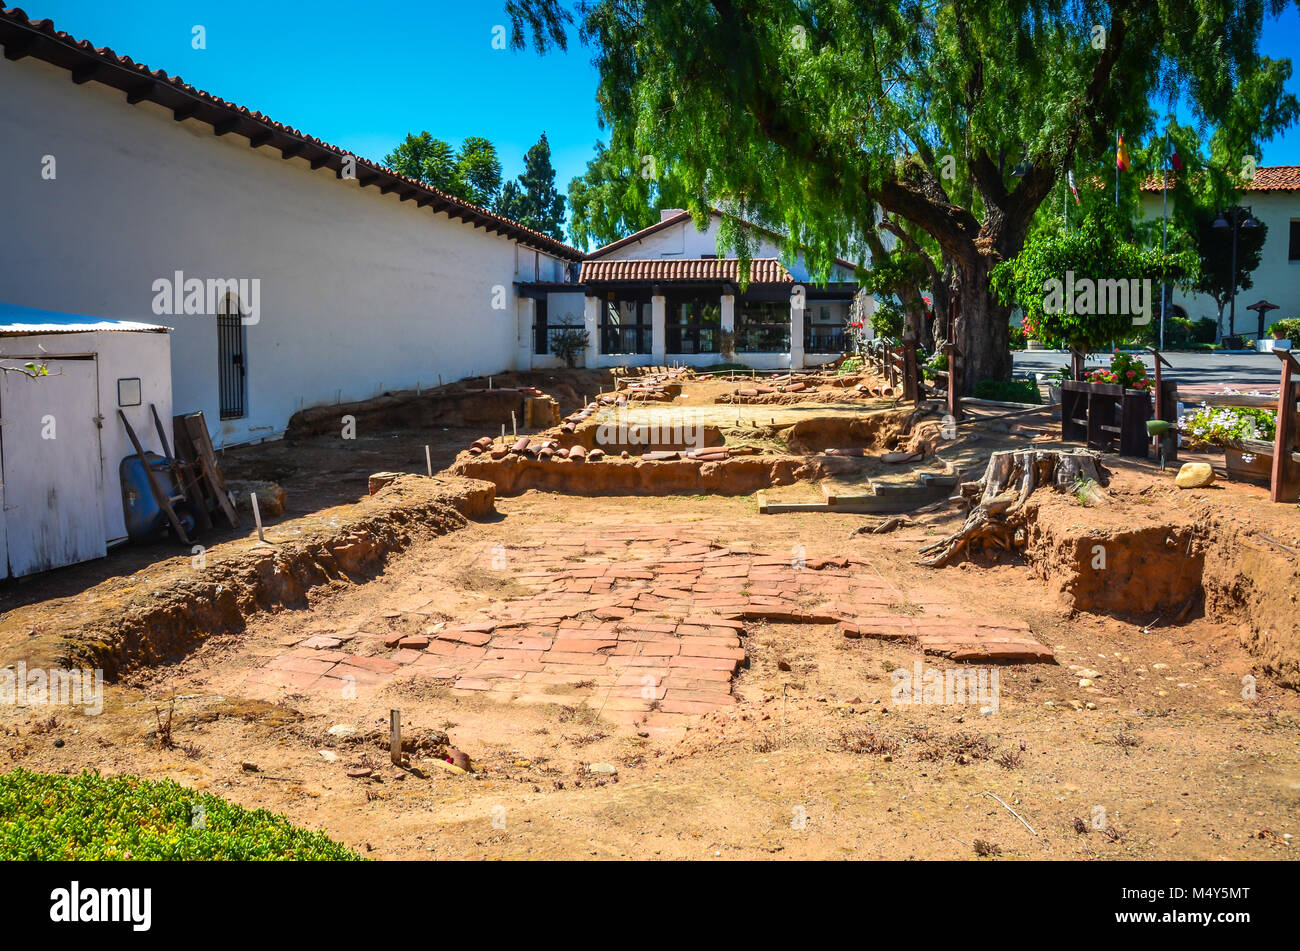 Exposed brick and grid dig site at archeological exhibit of Mission Basilica San Diego de Alcalá in San Diego, California. Stock Photo